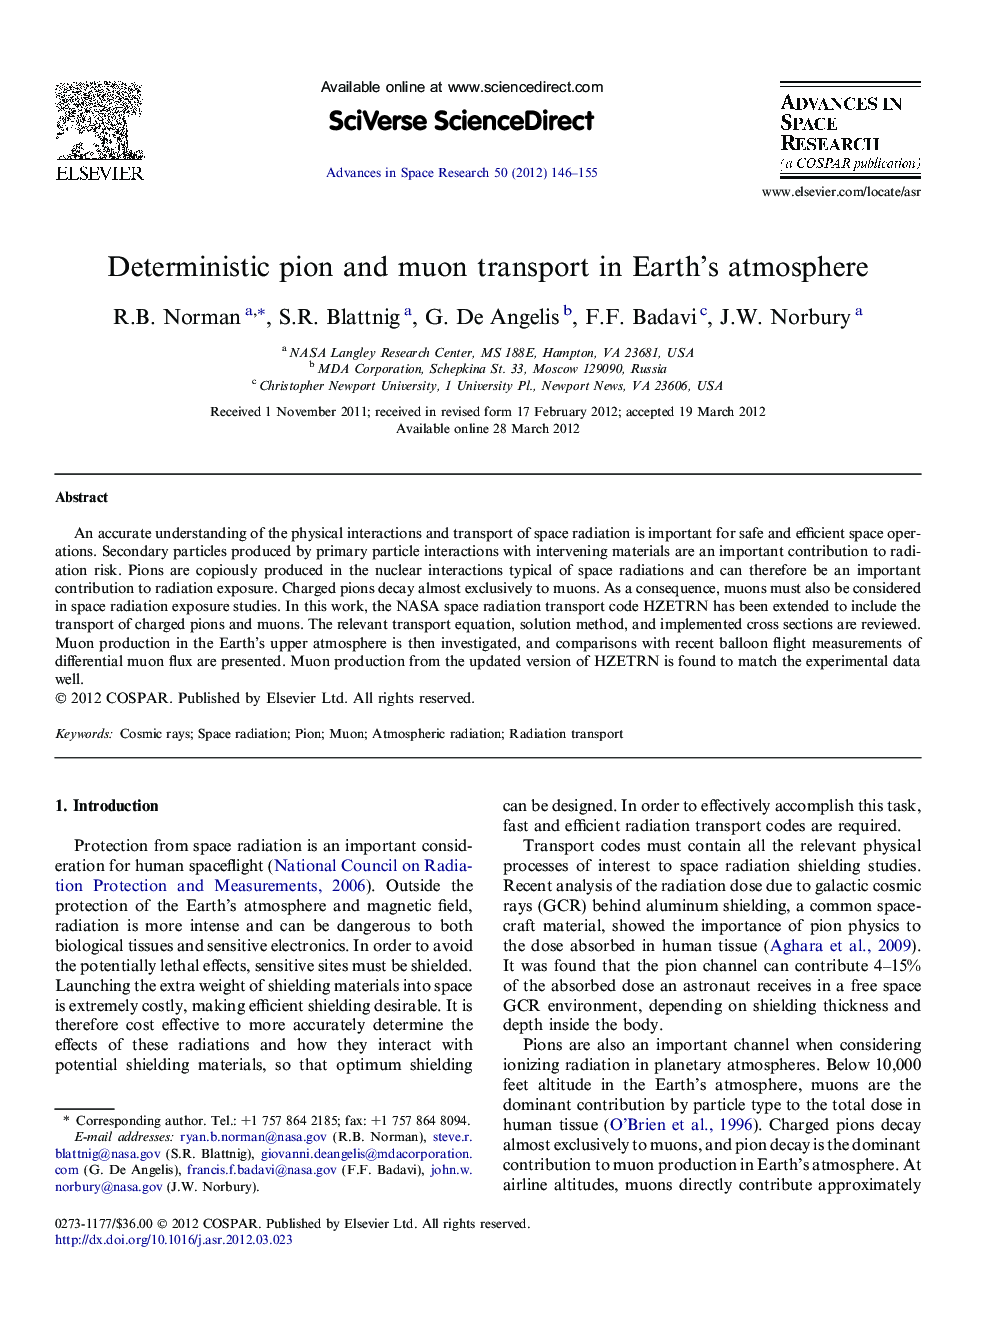 Deterministic pion and muon transport in Earth’s atmosphere